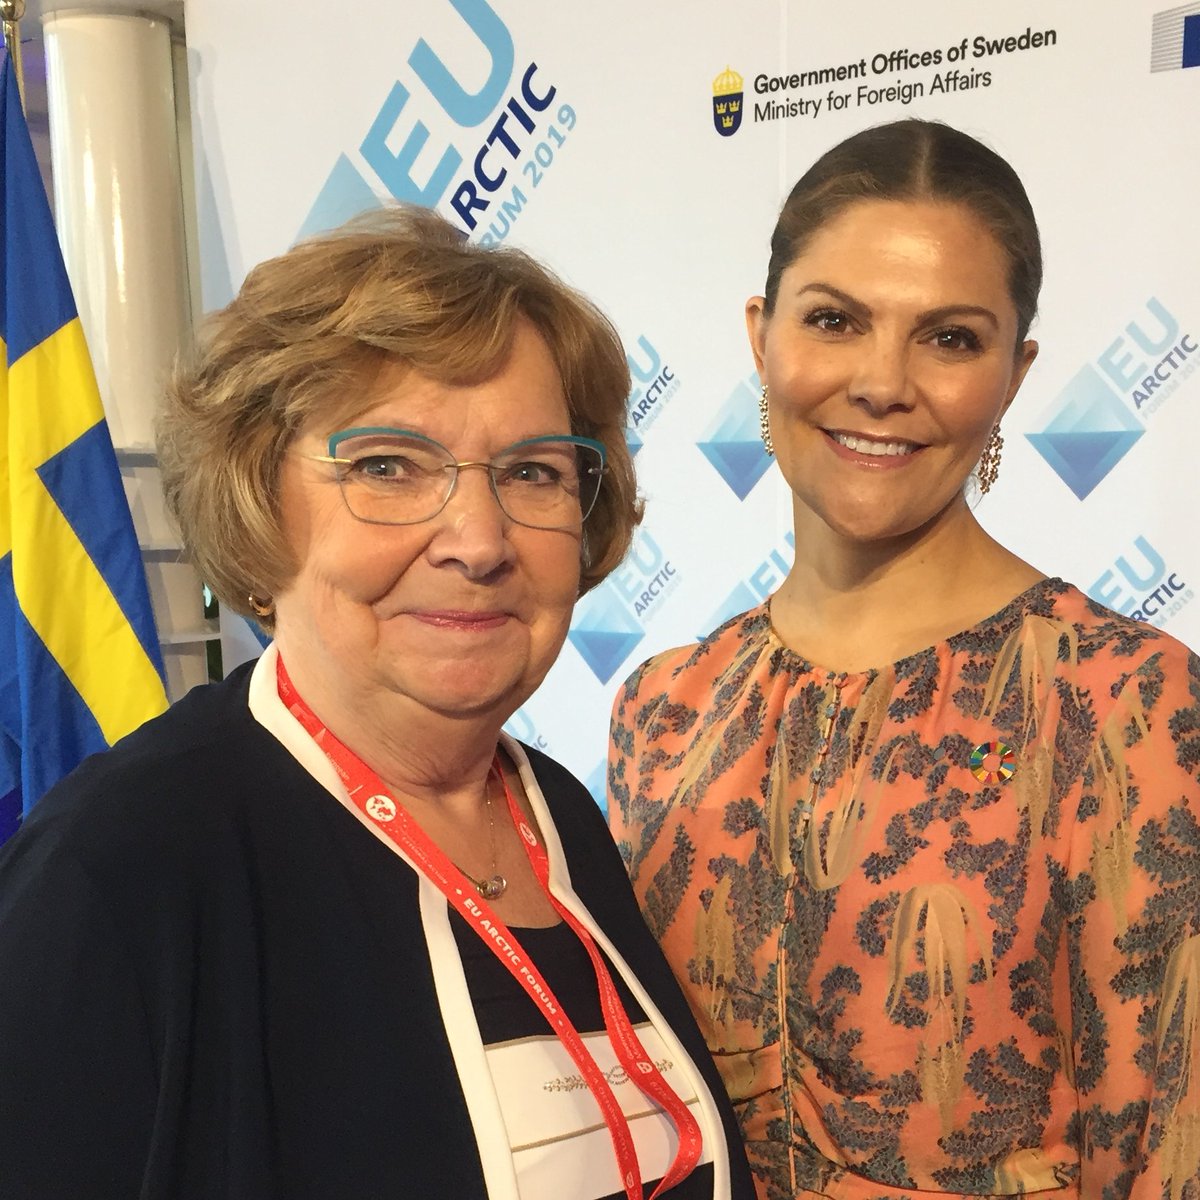 Governor of Västerbotten - new Chair of #Barents Regional Council - Magdalena Andersson, welcomes Crown Princess Victoria of Sweden to #Umeå, where EU Arctic Forum and Barents Ministerial meetings take place this week. #BarentsMinisterial19 #BarentsCooperation #EUArcticForum